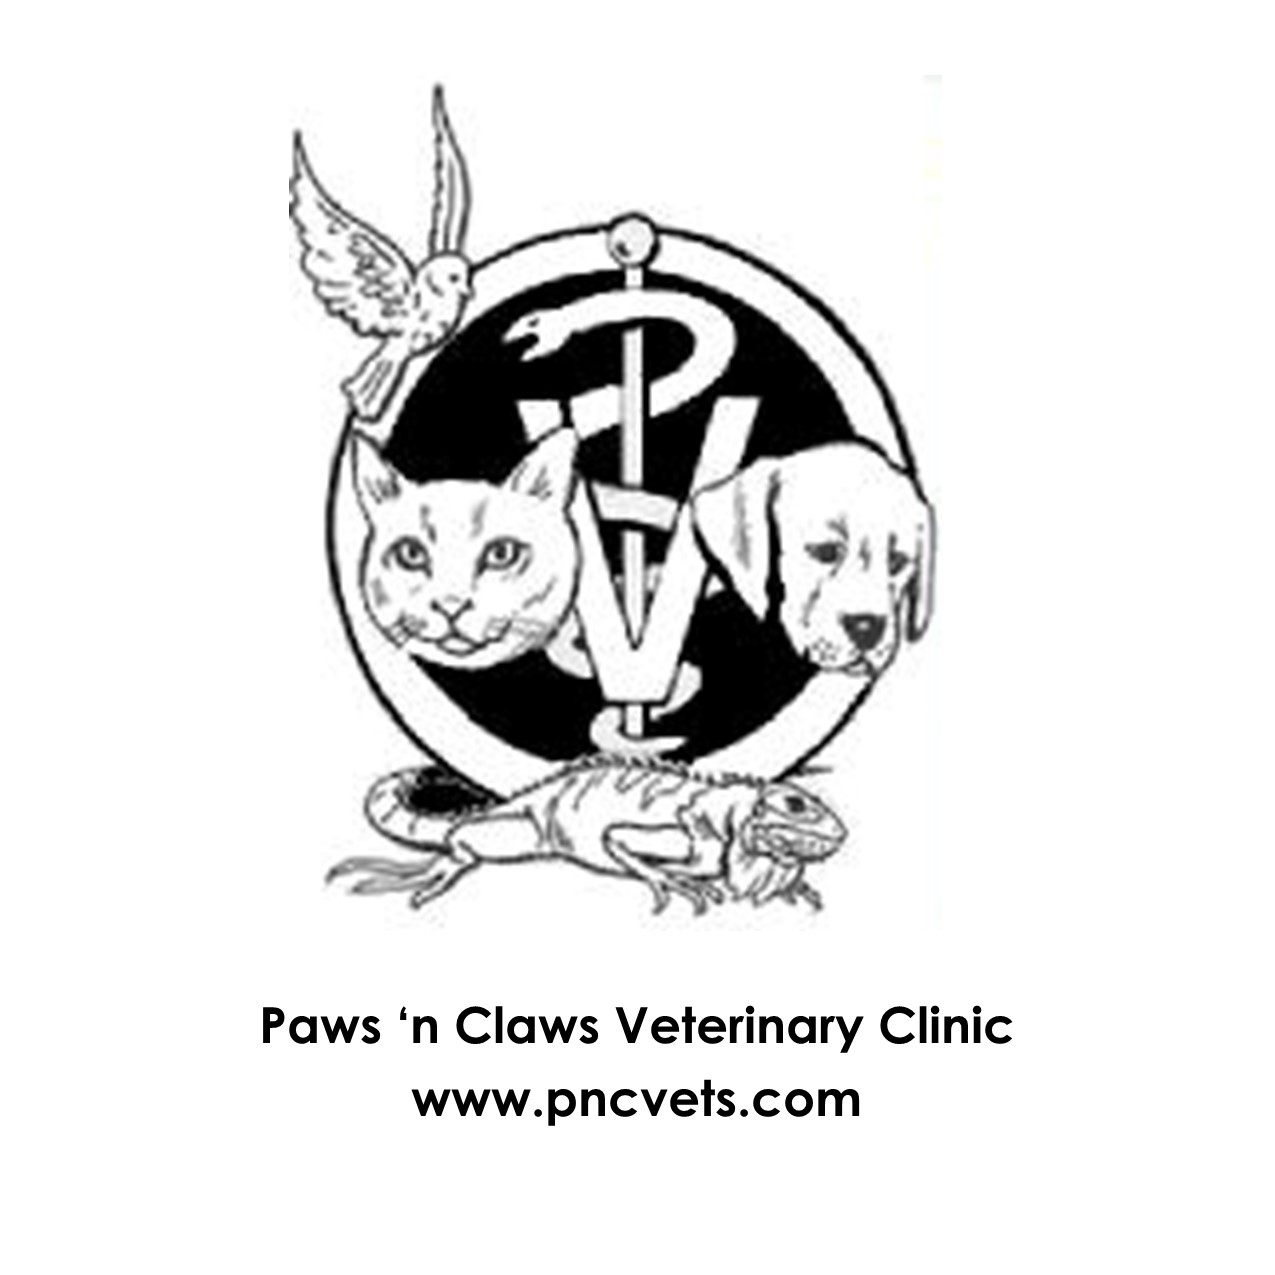 Paws 'n Claws Veterinary Clinic